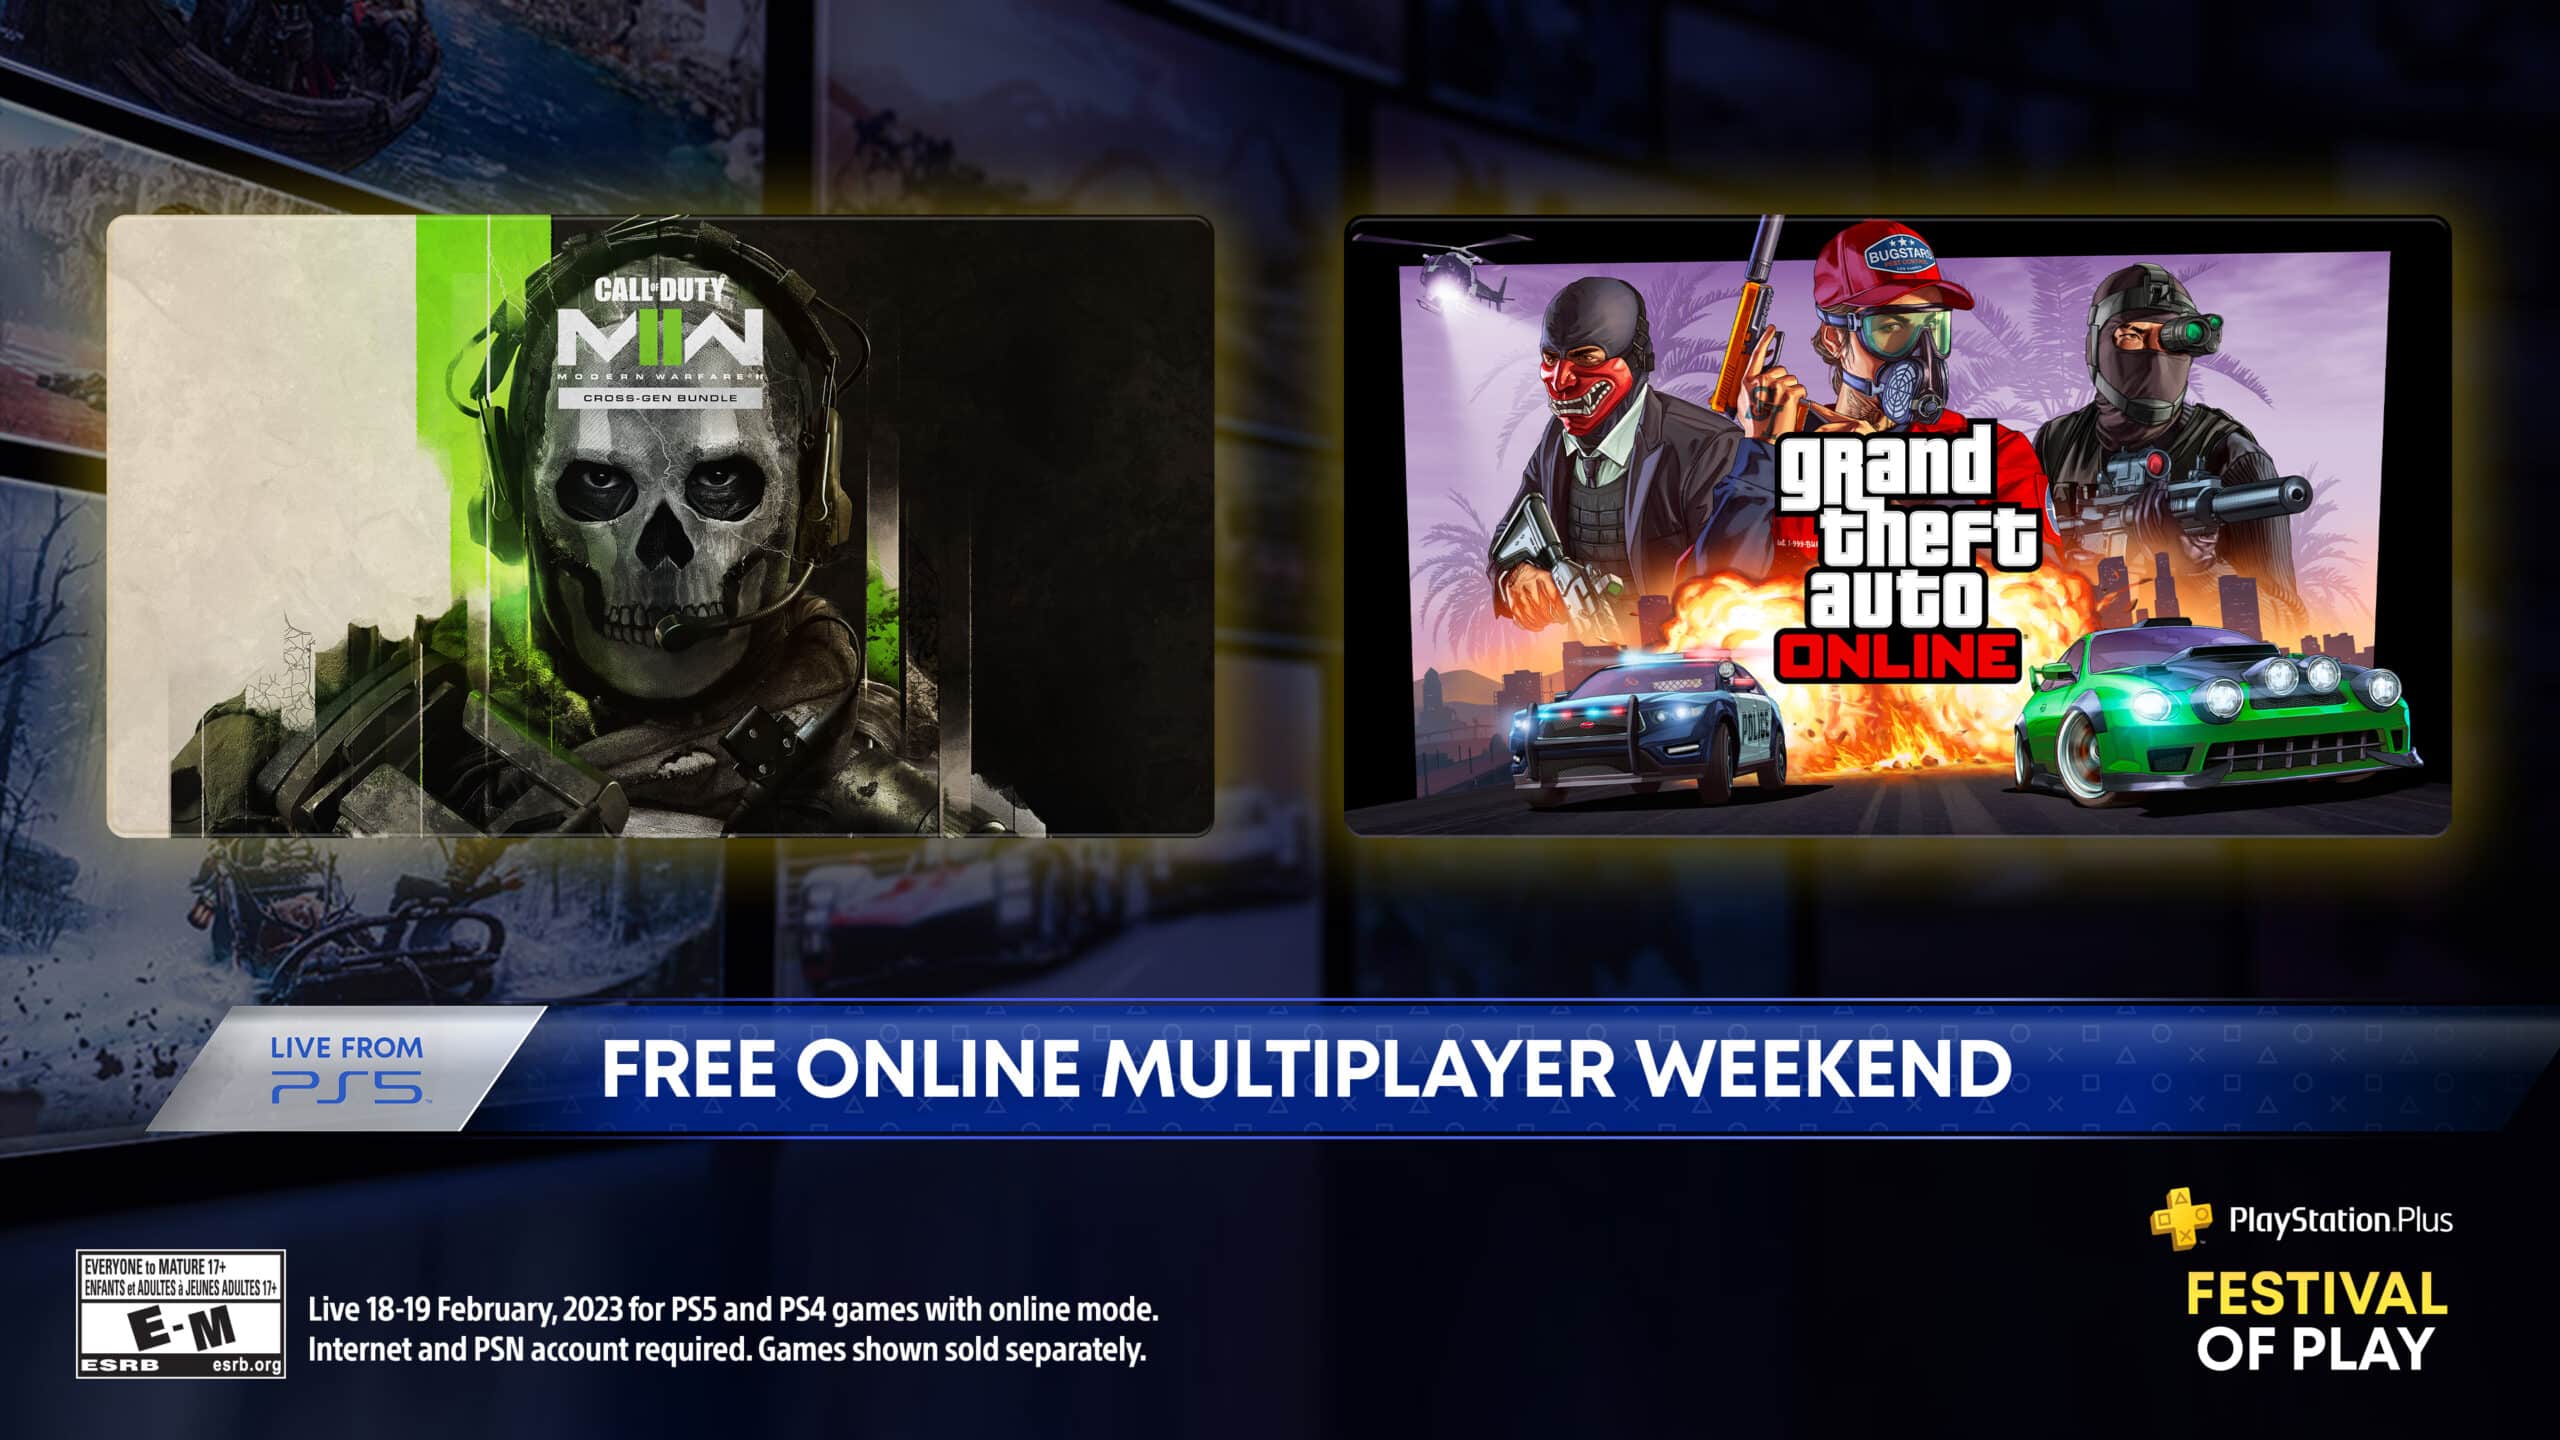 PlayStation Plus Festival of Play weekend multiplayer